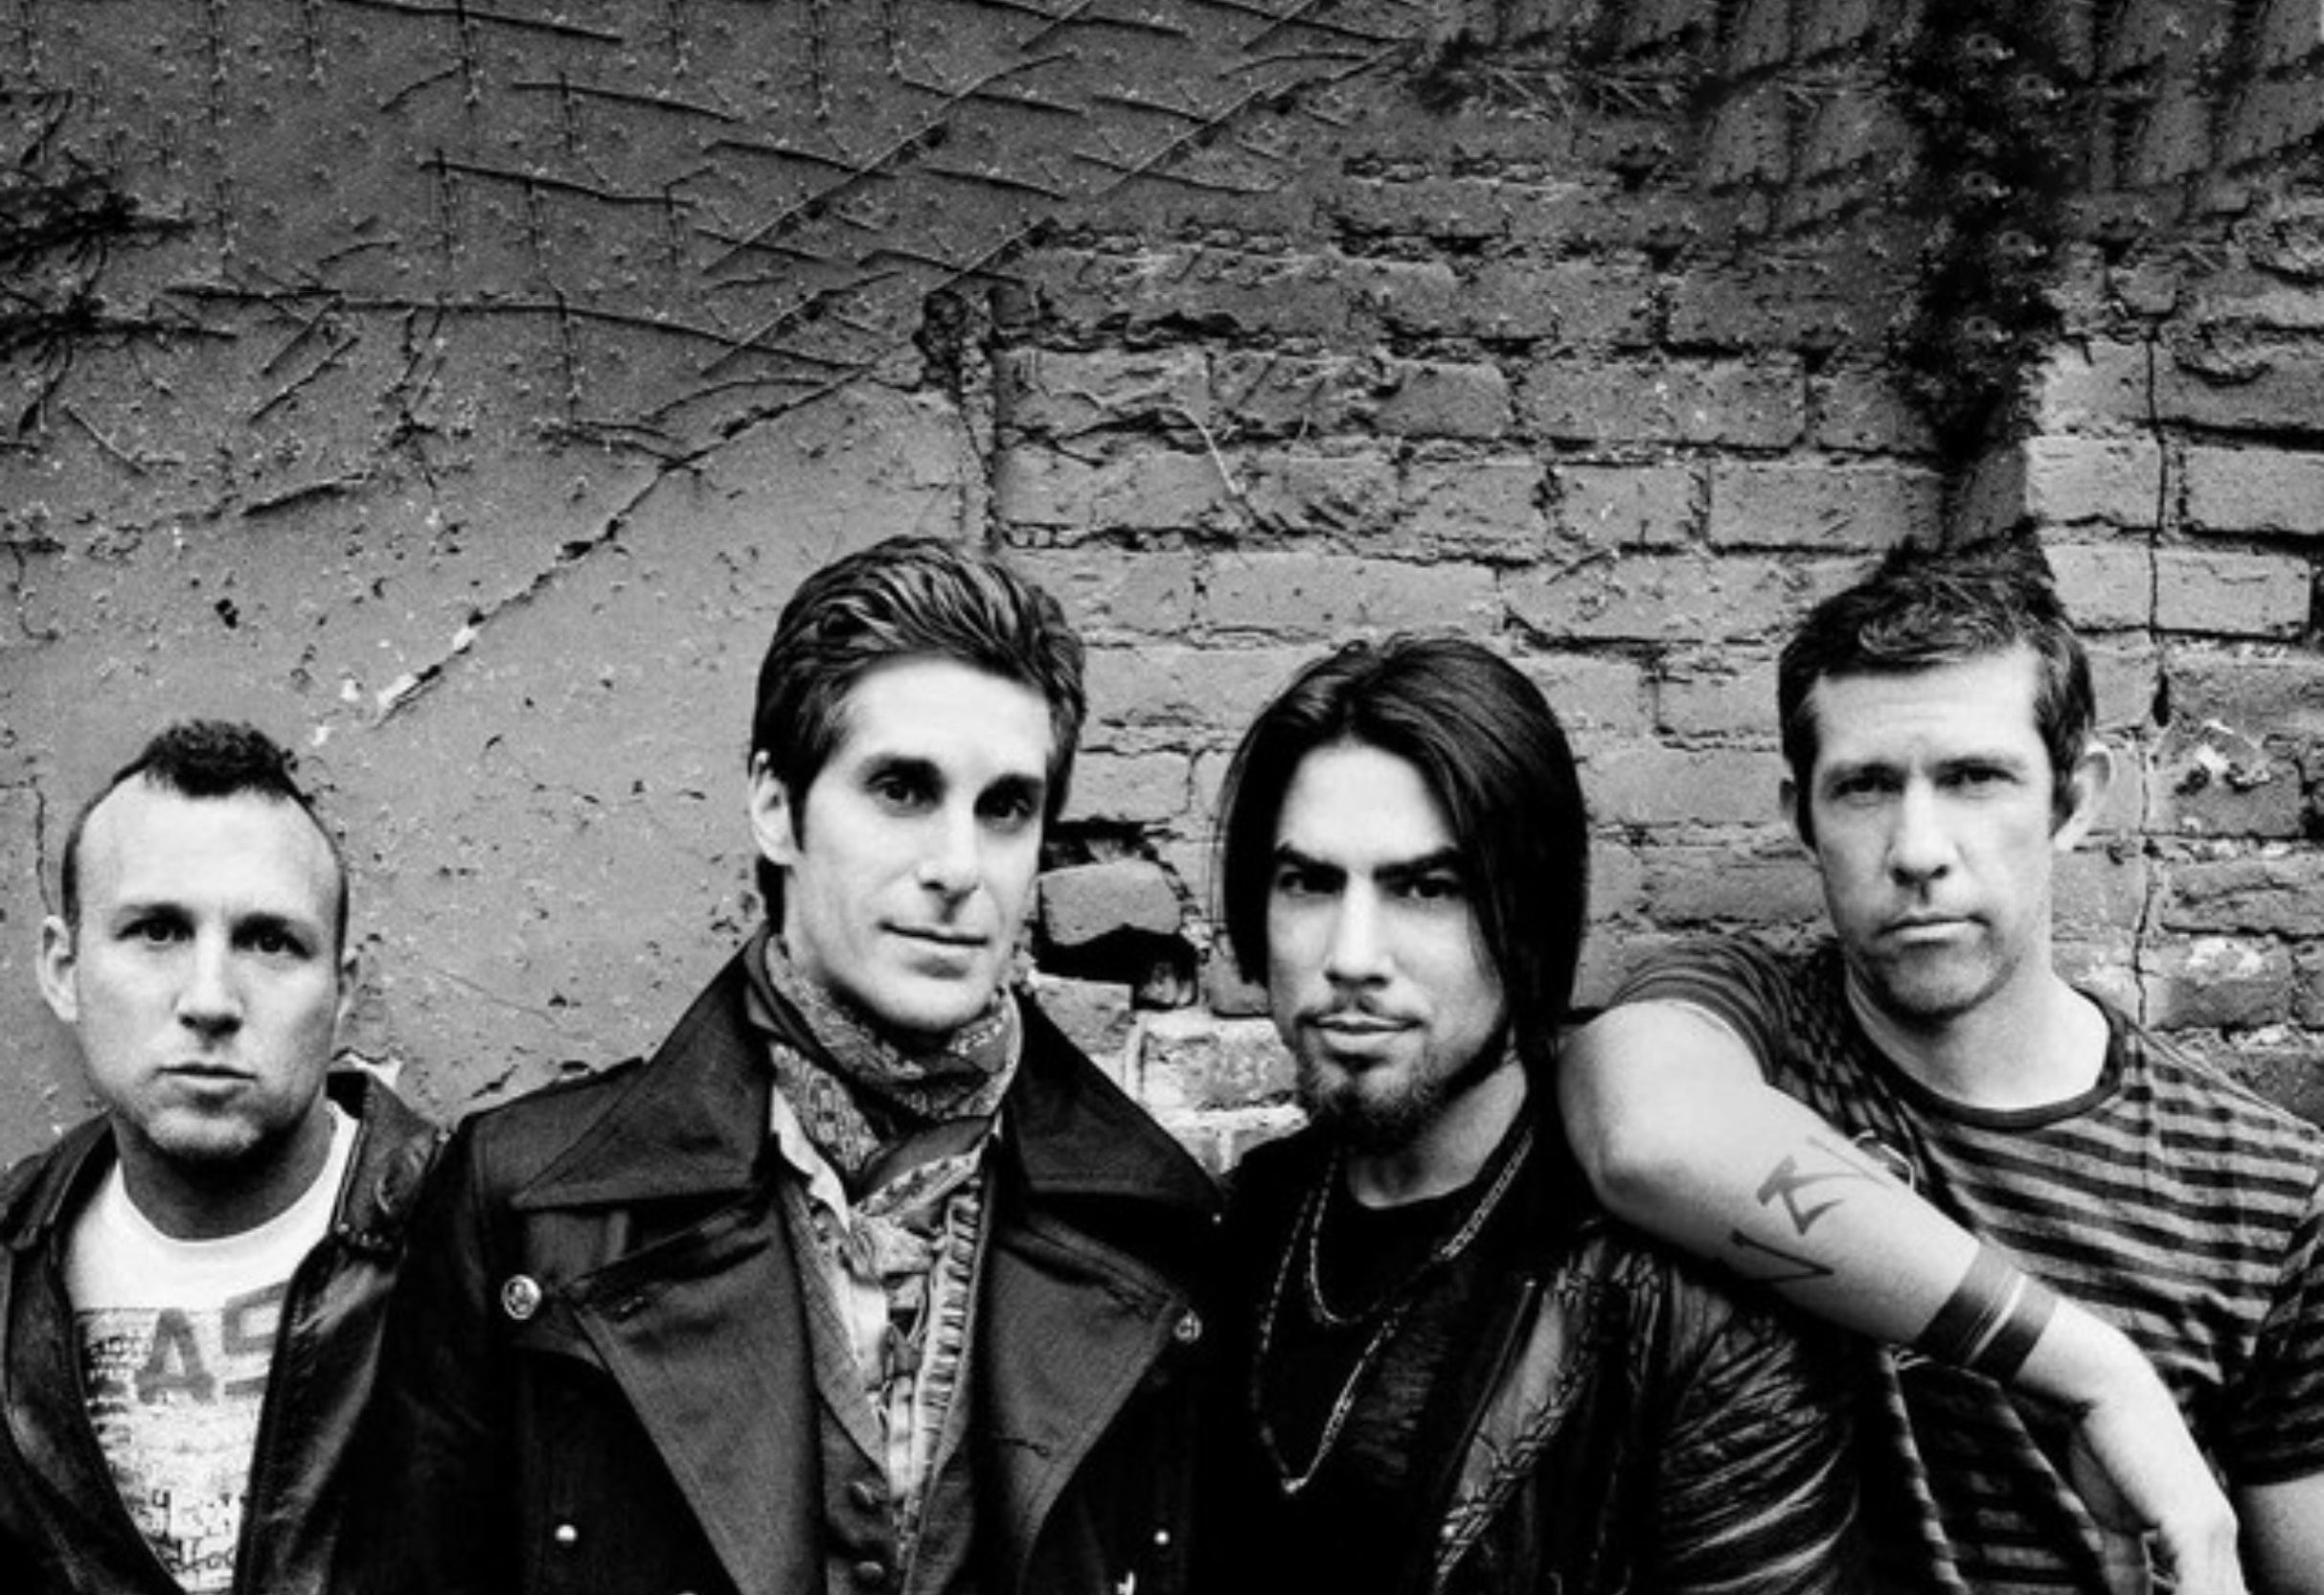 Jane's Addiction & Love and Rockets pre-sale code for advance tickets in New York